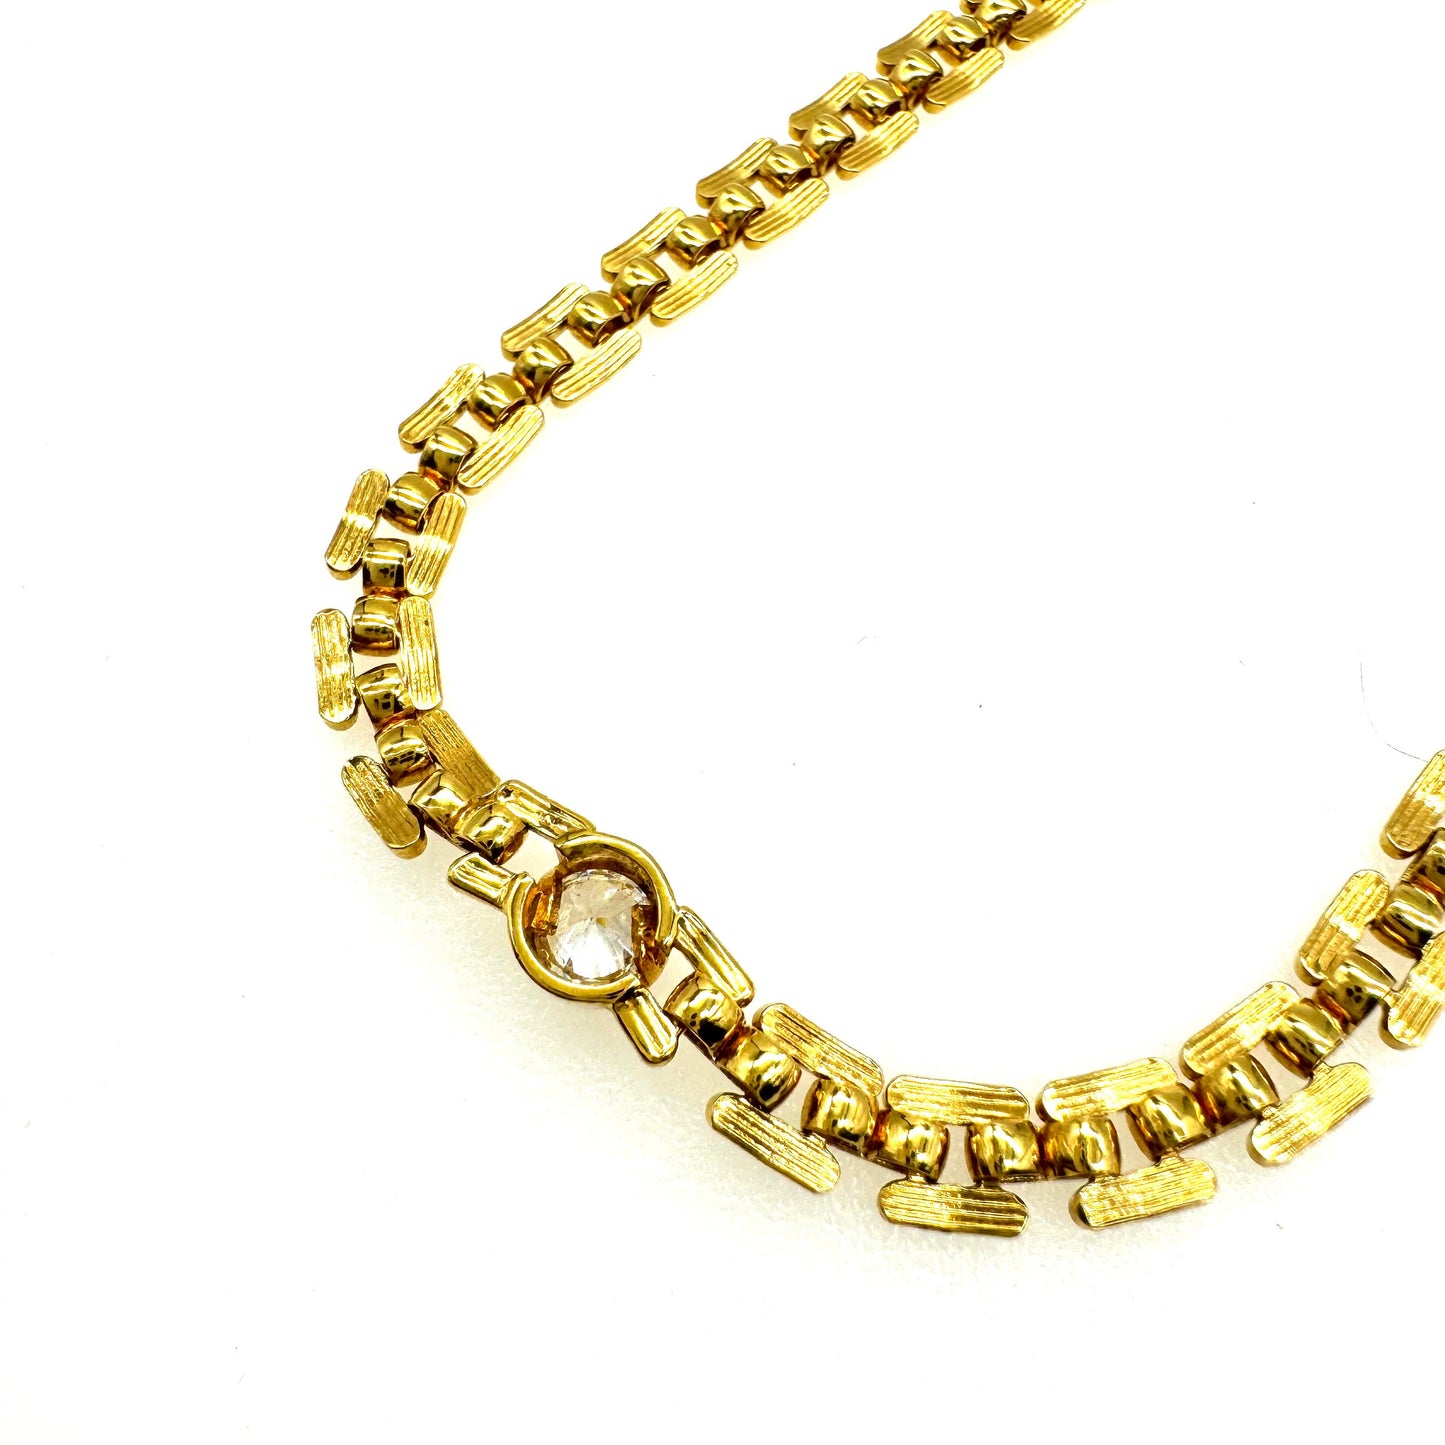 Unsigned Fine Panther Link Chain Link Necklace with Single Bezel Set Clear Round Crystal